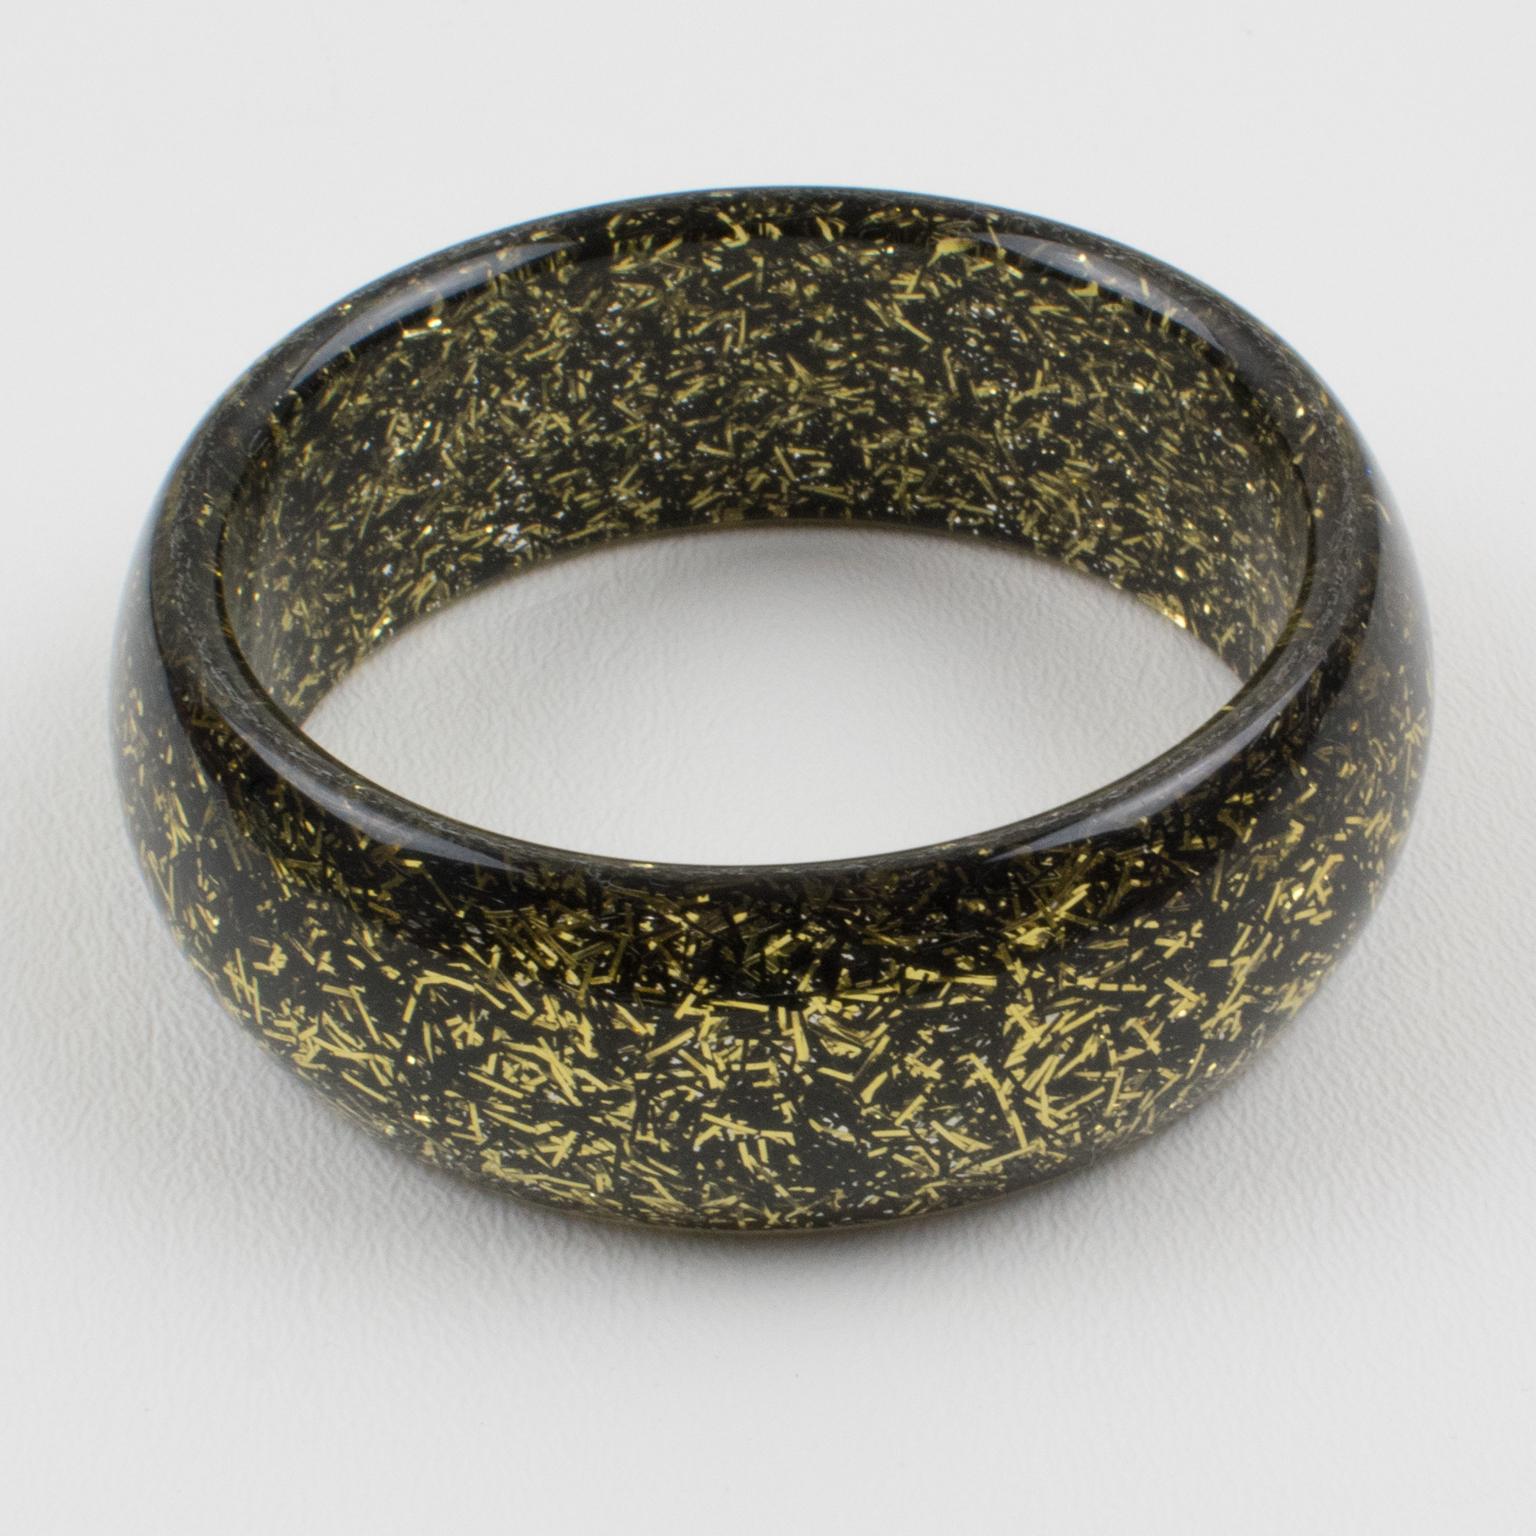 Lovely Lucite bracelet bangle. The bangle has a domed shape and is comprised of clear Lucite injected with metallic thread inclusions in black and gold colors. The metallic threads sparkle as those of Christmas tinsels. There is no visible maker's